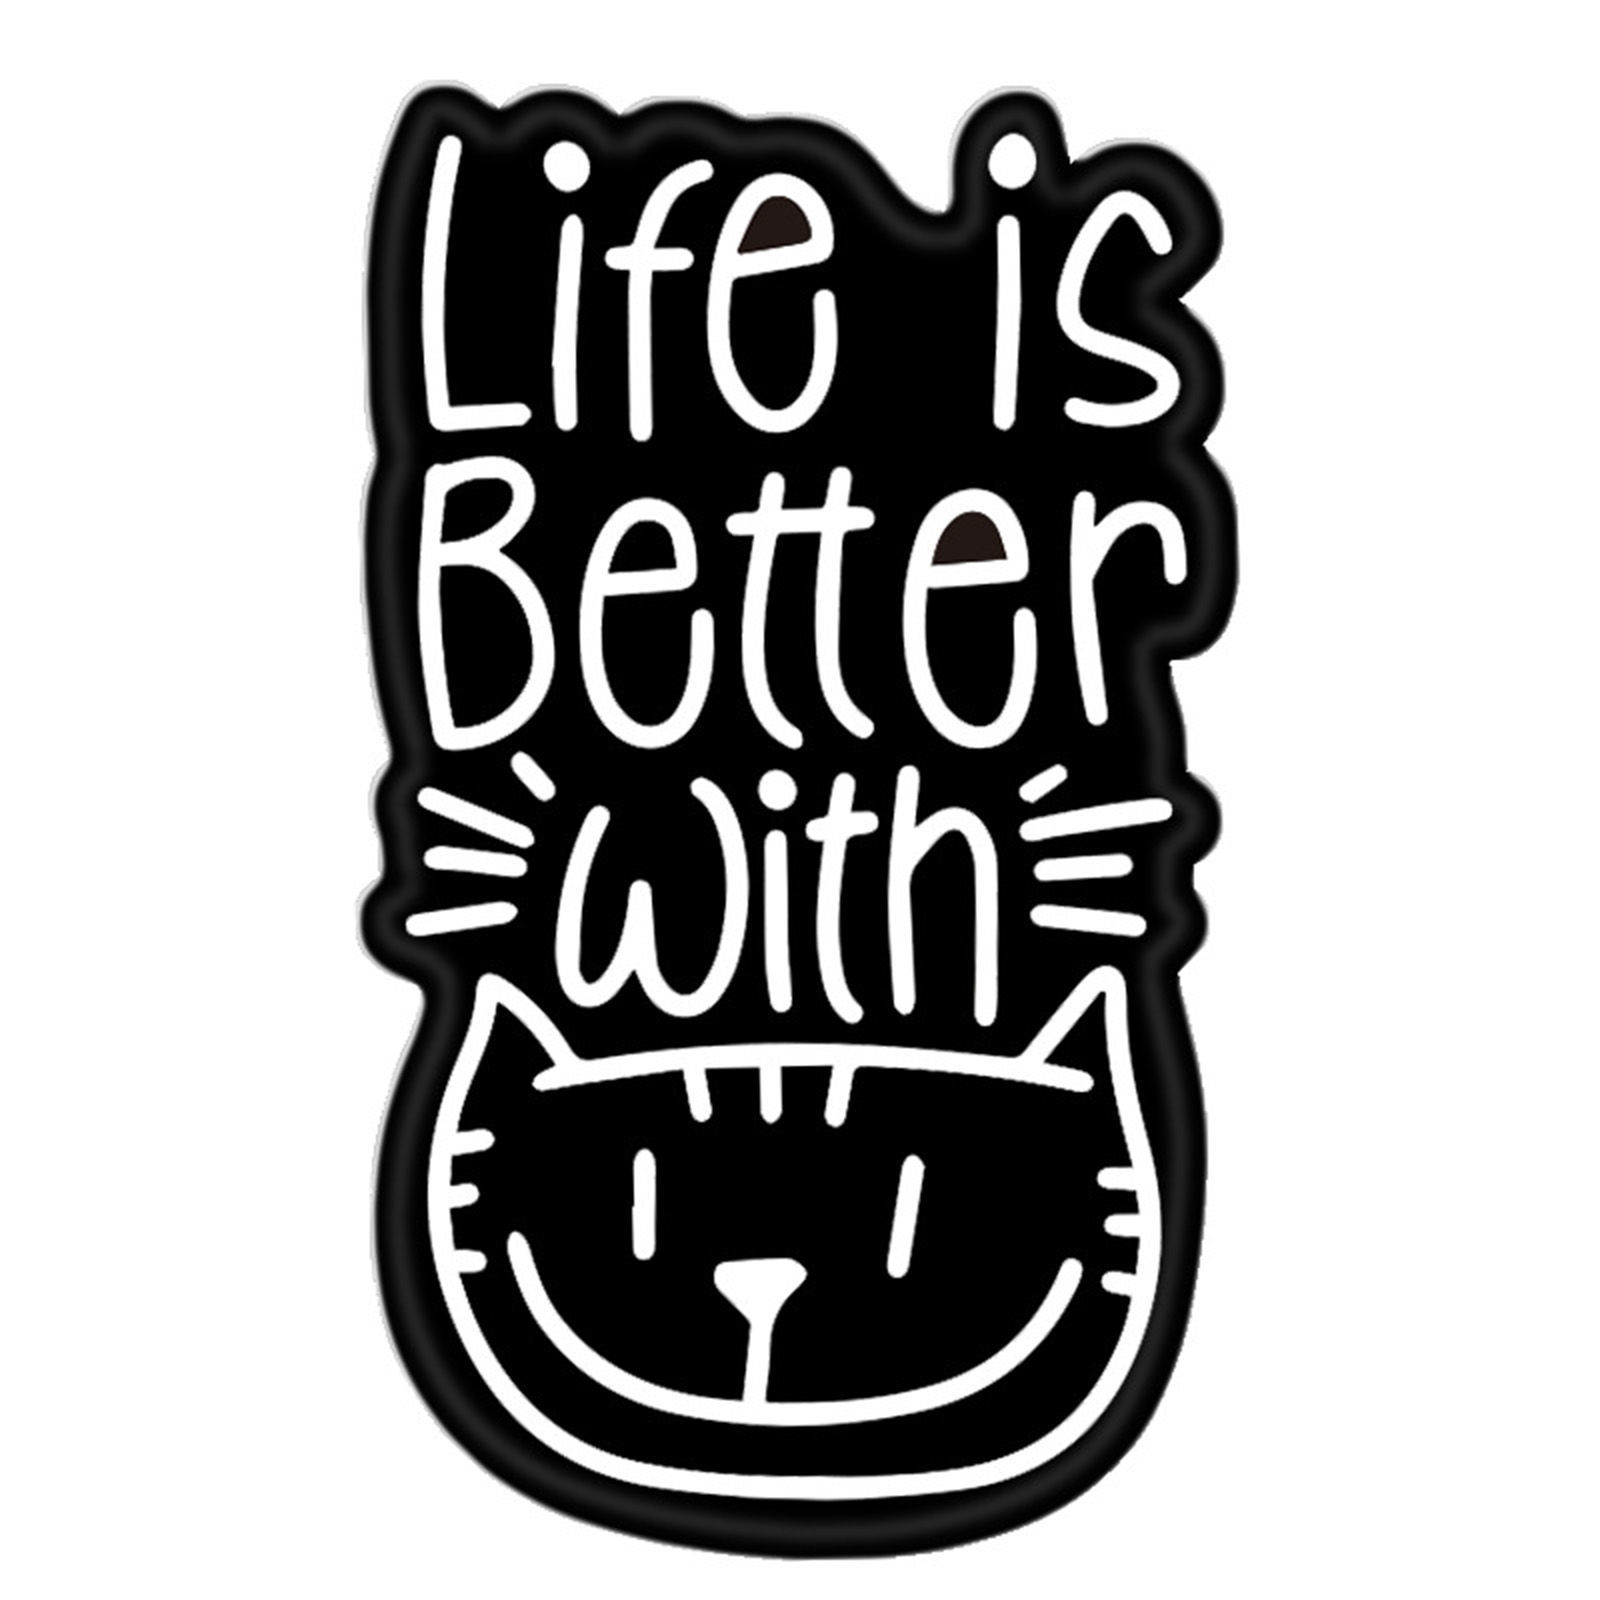 Picture of Cute Pin Brooches Cat Animal Message " Life Is Better With Cats " Black & White Enamel 3.1cm x 1.9cm, 1 Piece